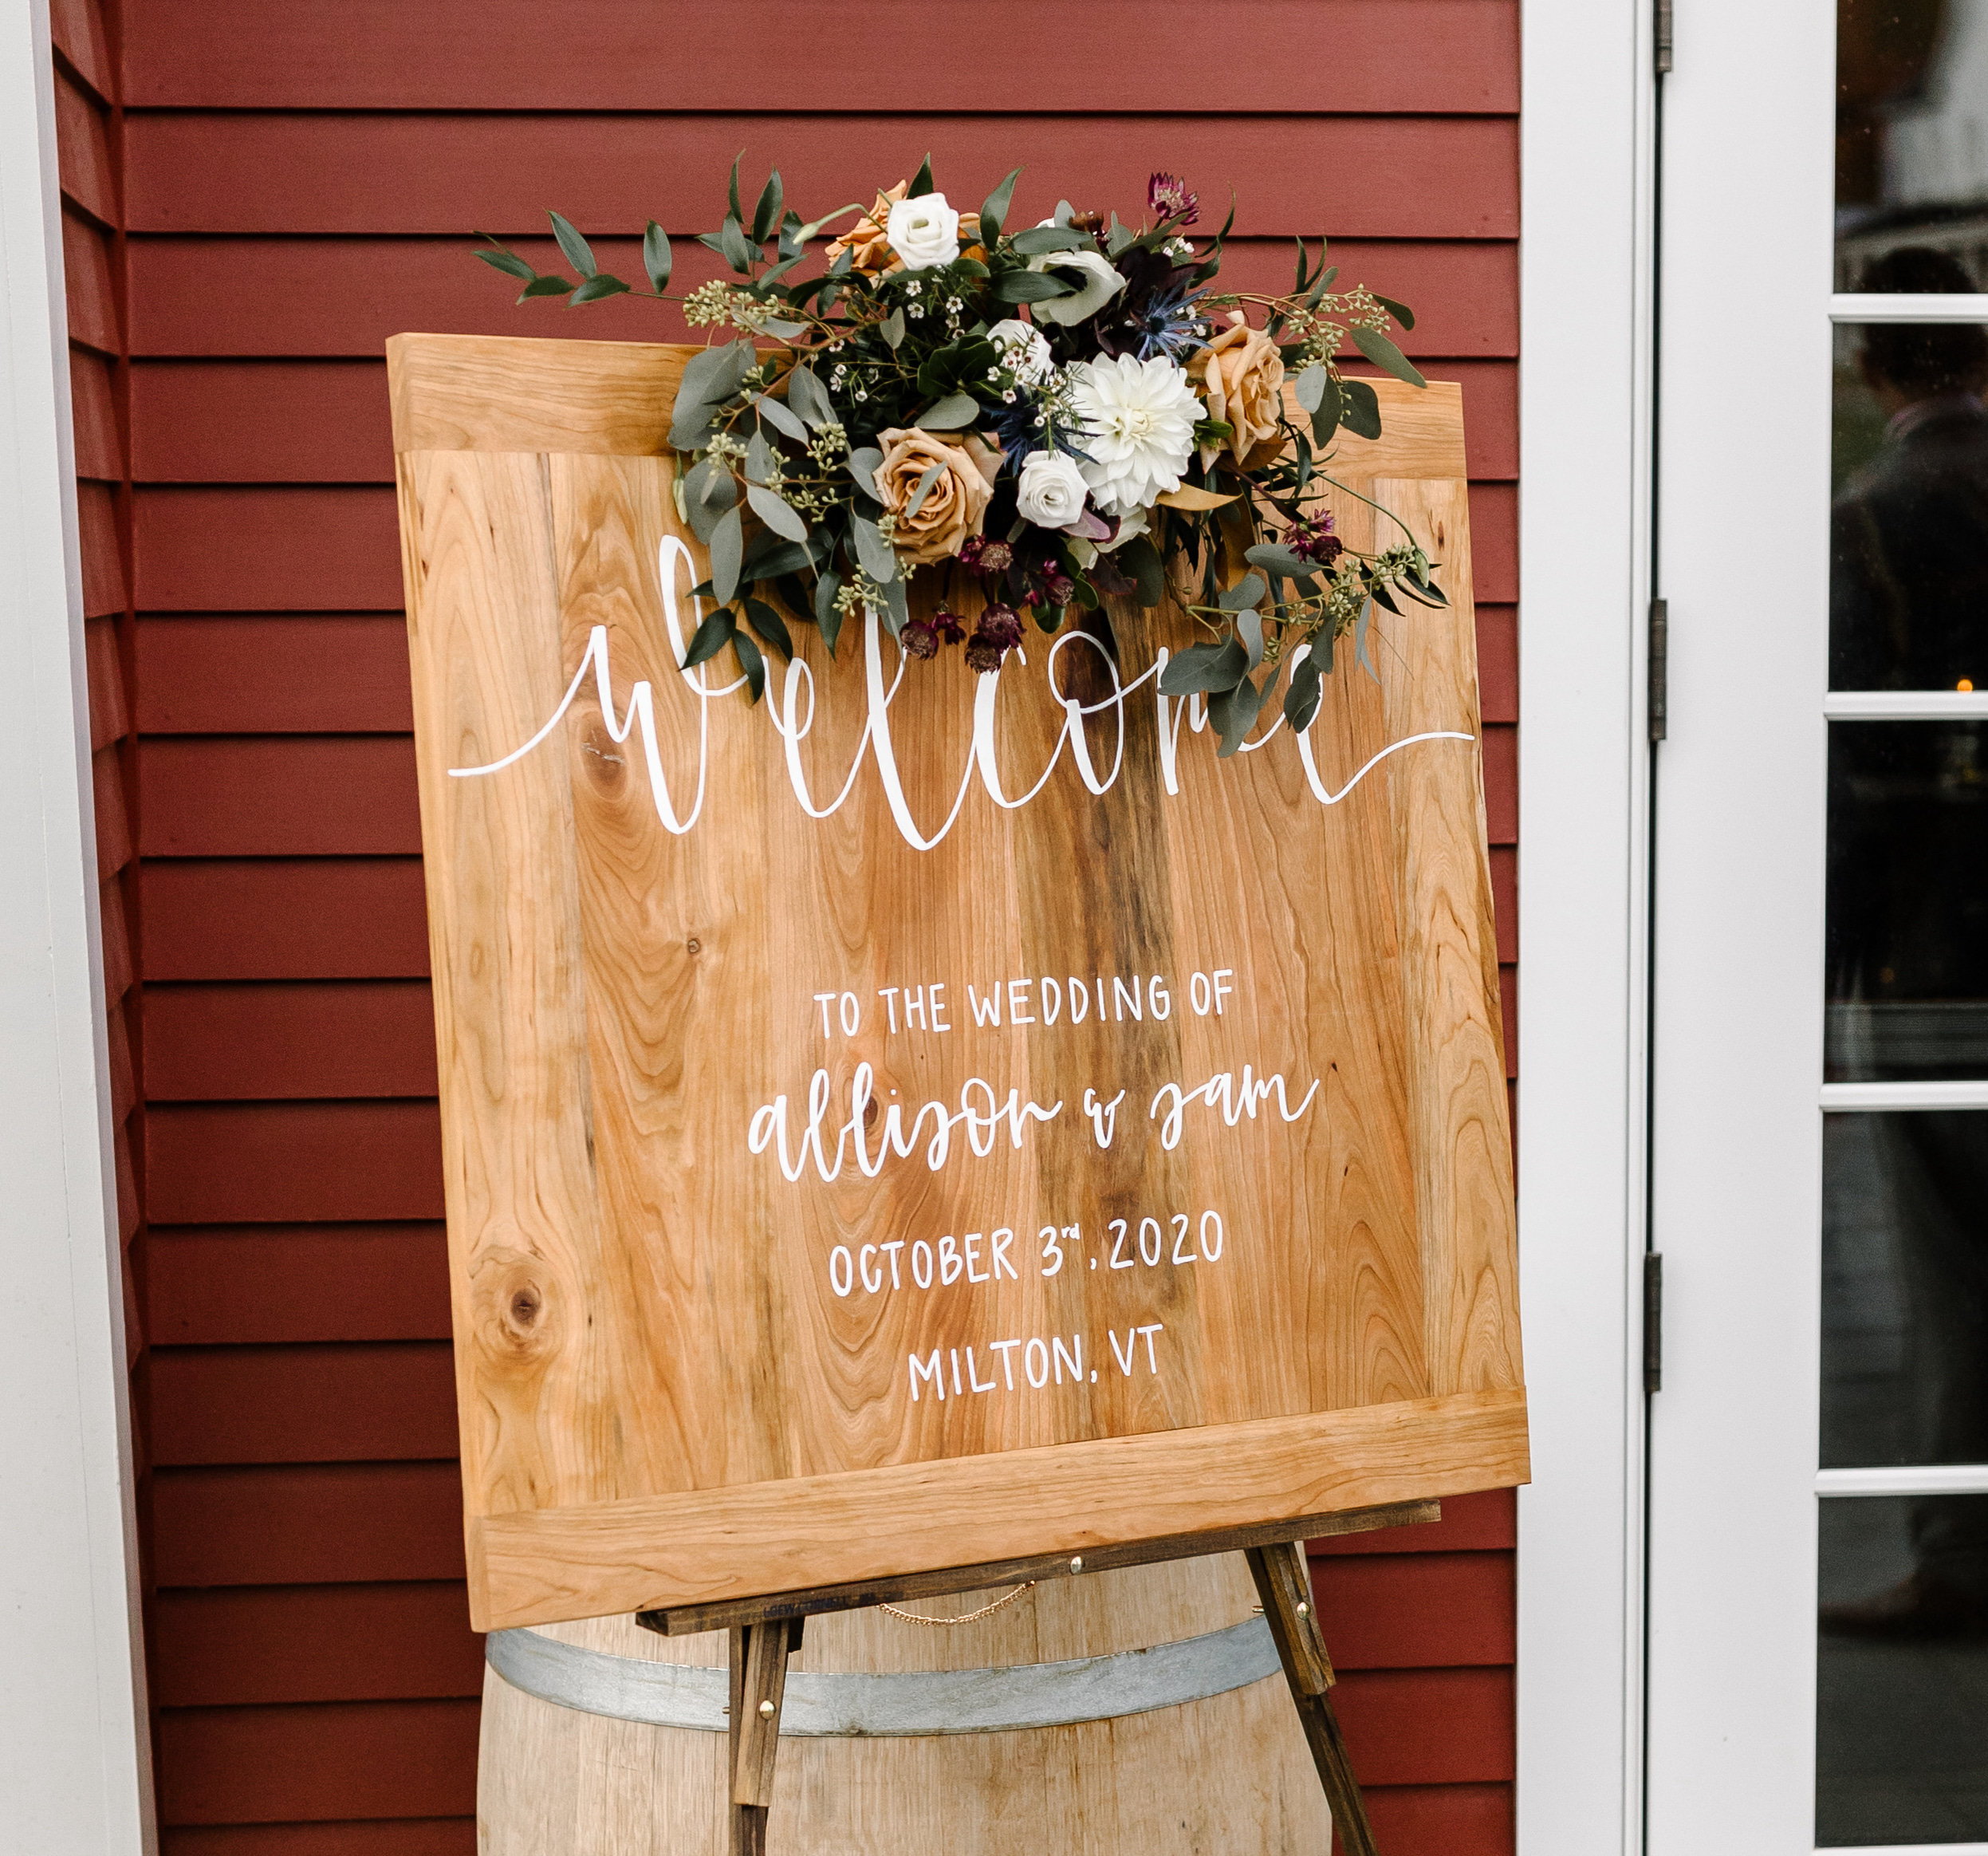 Learn how to make your own DIY Wedding signs (or any other signs you need) with this Sam Macy Designs shop video & step-by-step instructions.